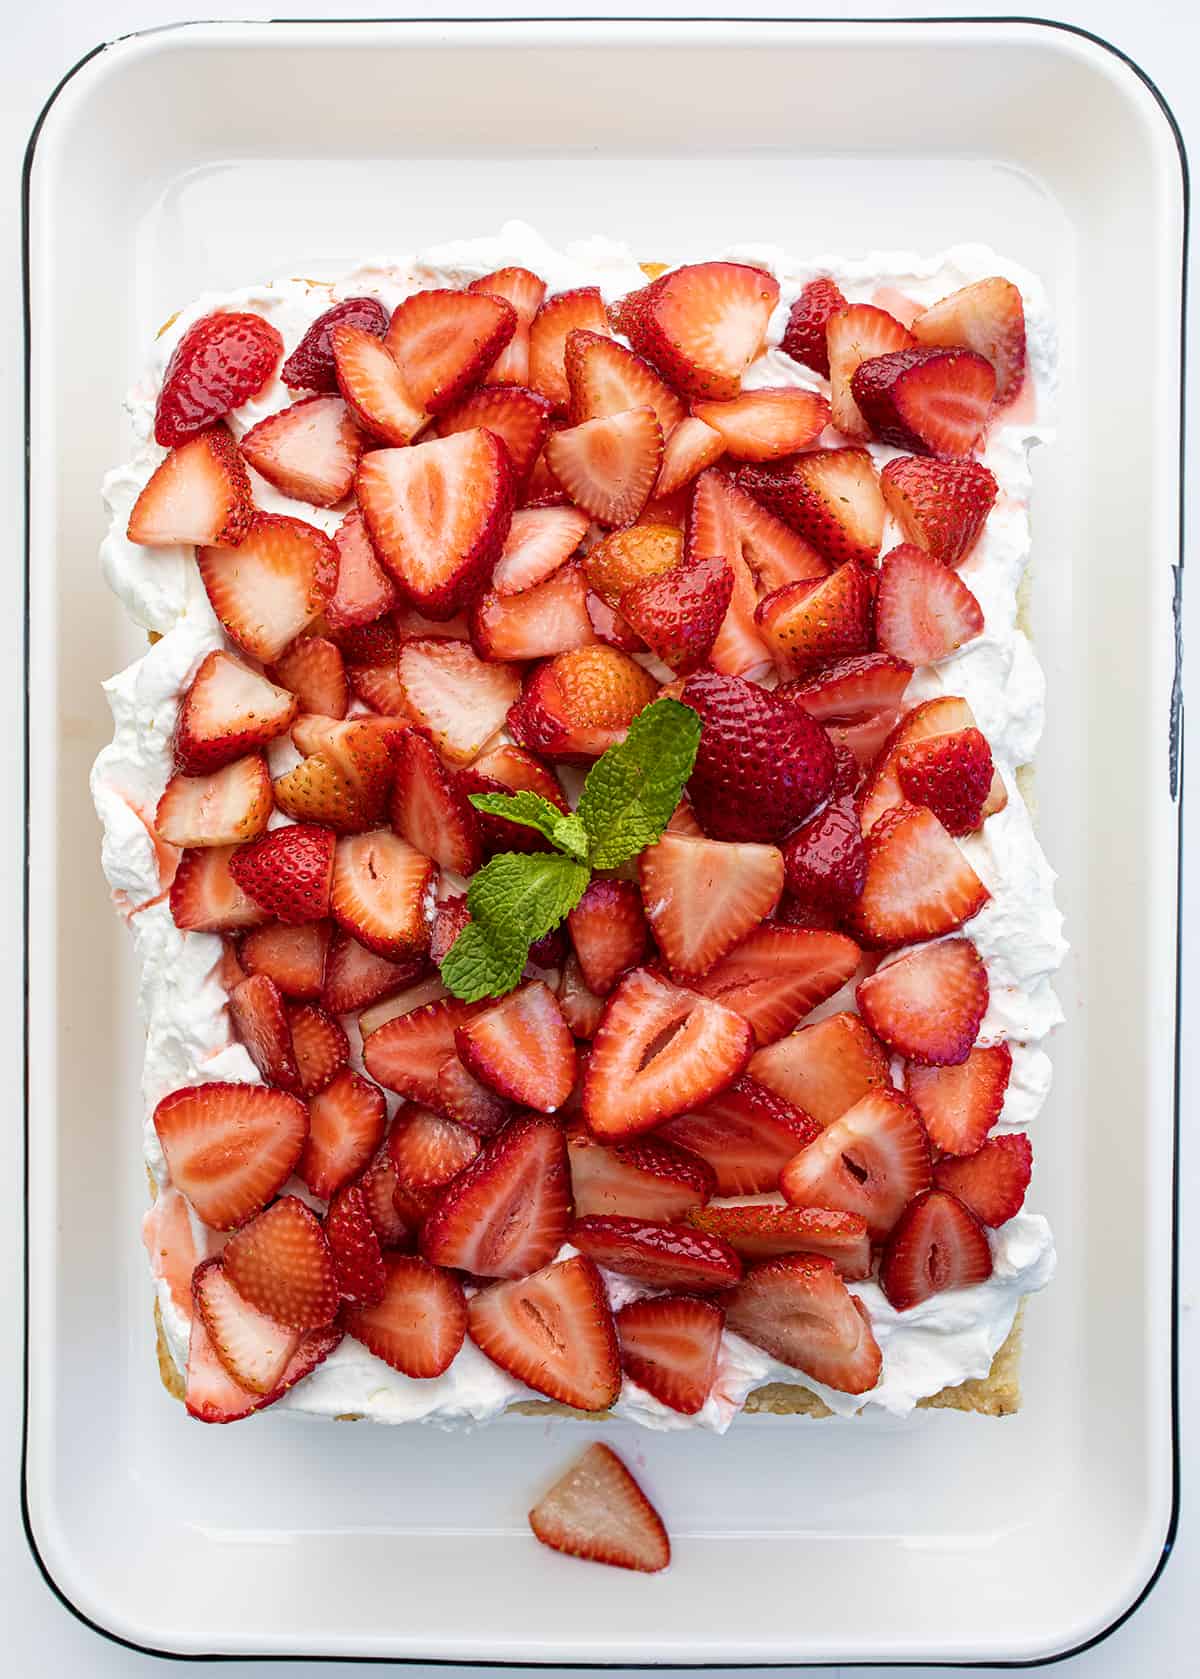 Looking Down onto a Sheet Pan Strawberry Shortcake with a Sprig of Mint in the Middle.